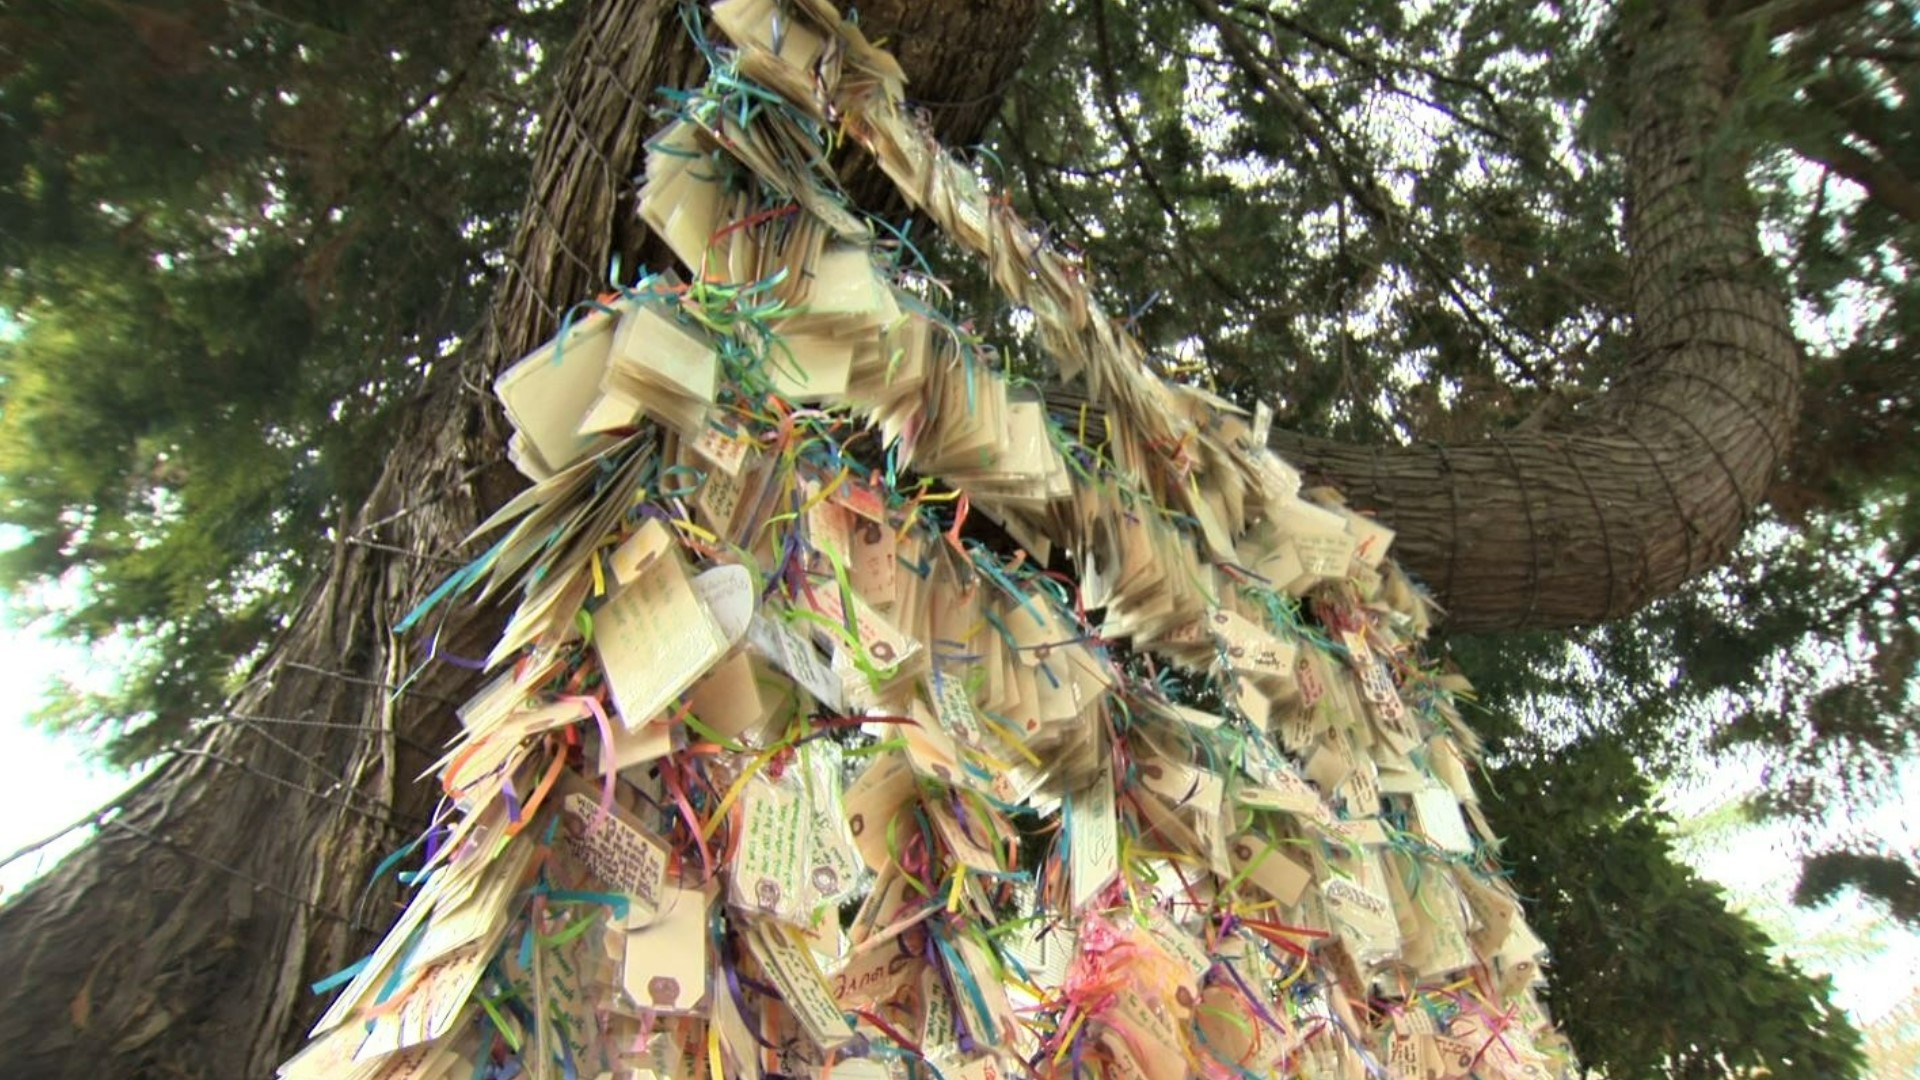 Thousands of people have written and hung wishes from the branches of a tree in the Capitol Hill neighborhood. #k5evening